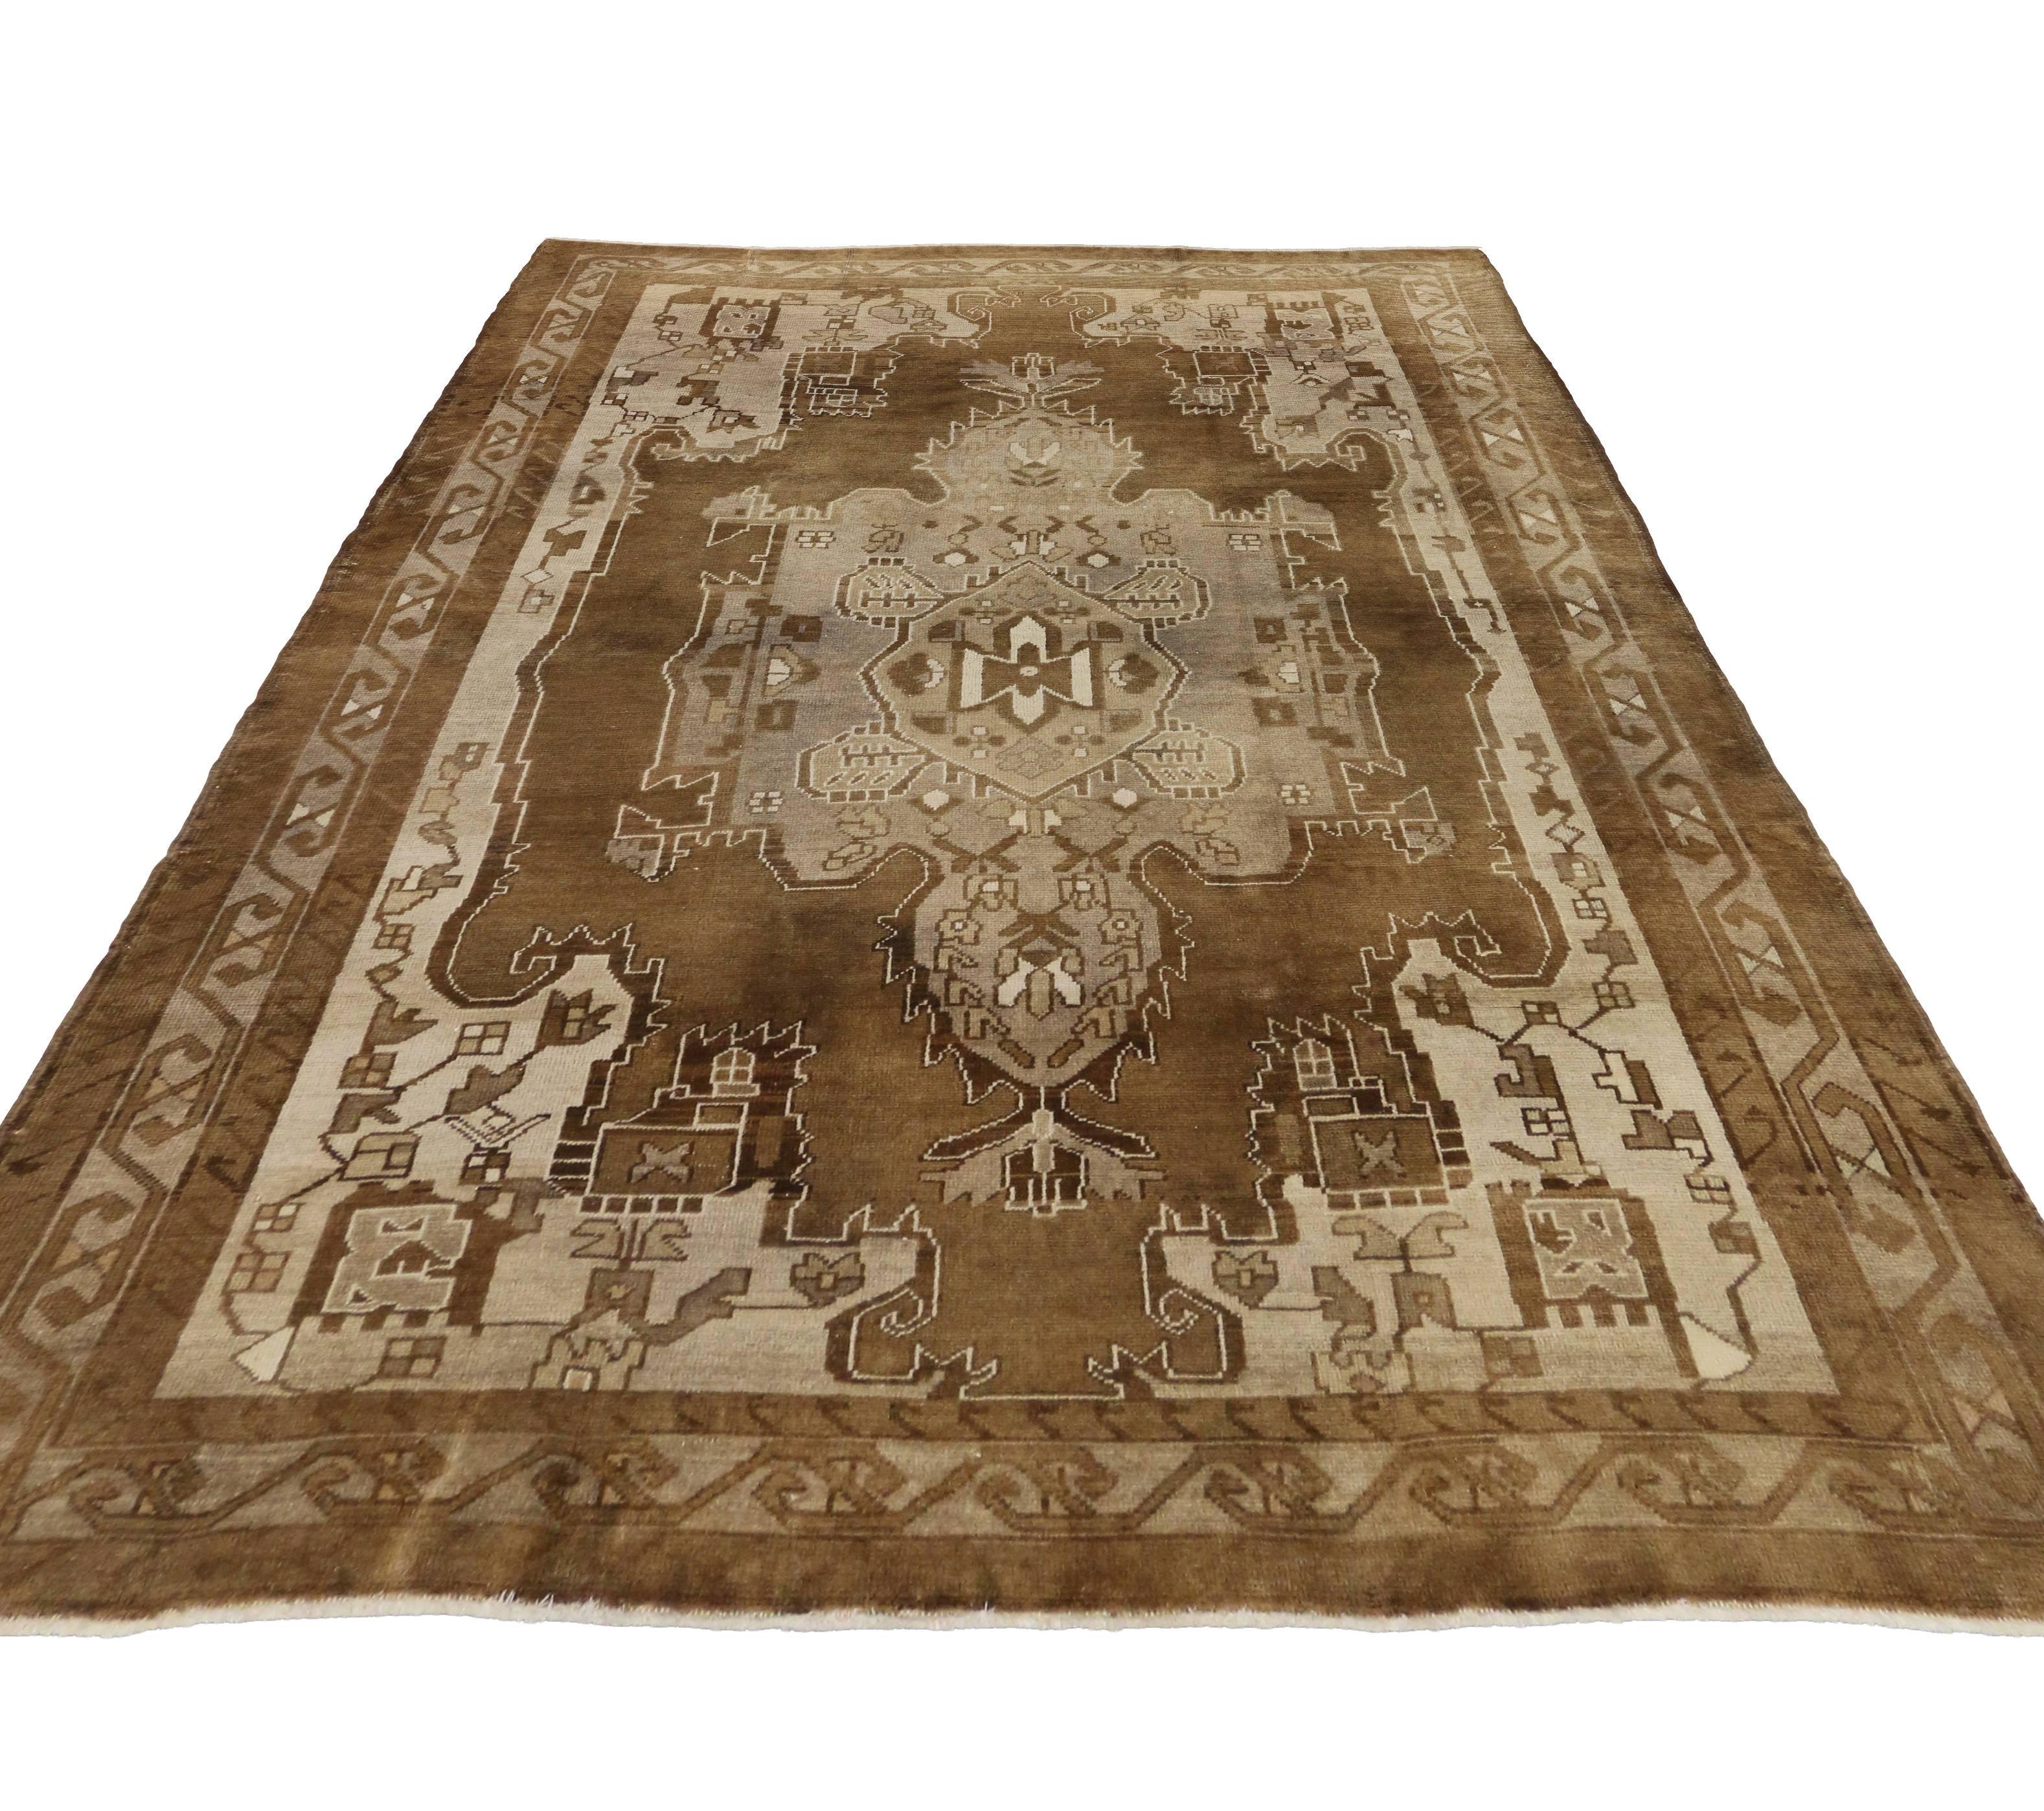 Full of character and stately presence, this vintage Kars rug with Mid-Century Modern style showcases an extravagant geometric design rendered in beautiful variegated shades of brown, tan, beige, gray, Chamoisee, ecru, greige and cream. Featuring an